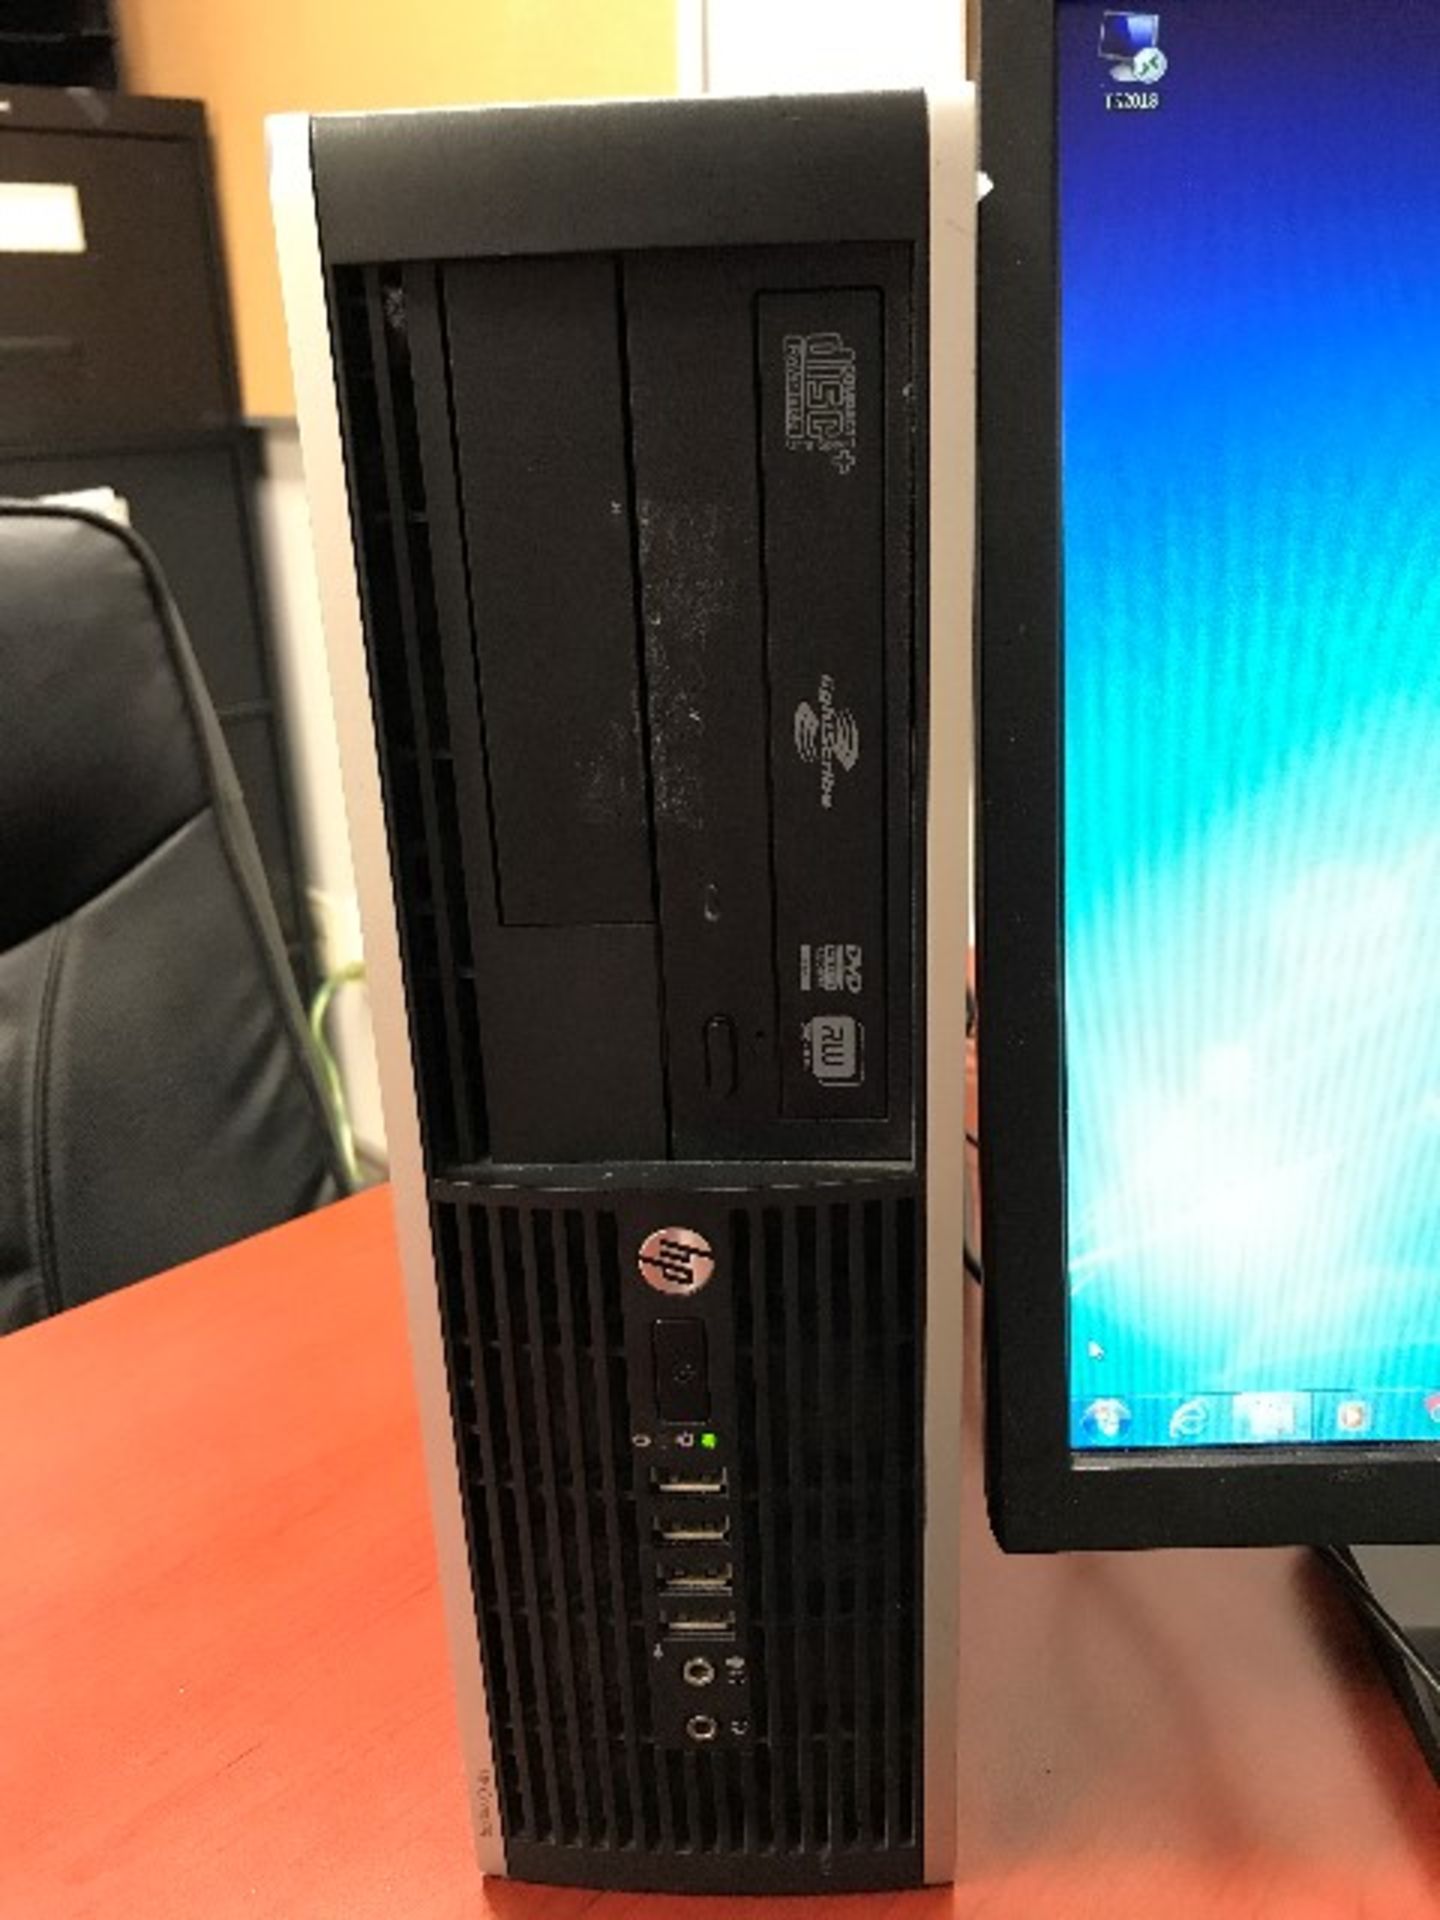 HP i3,3.1GHz,4GB RAM,232GB HDD,monitor,keyboard,mouse - Image 2 of 3